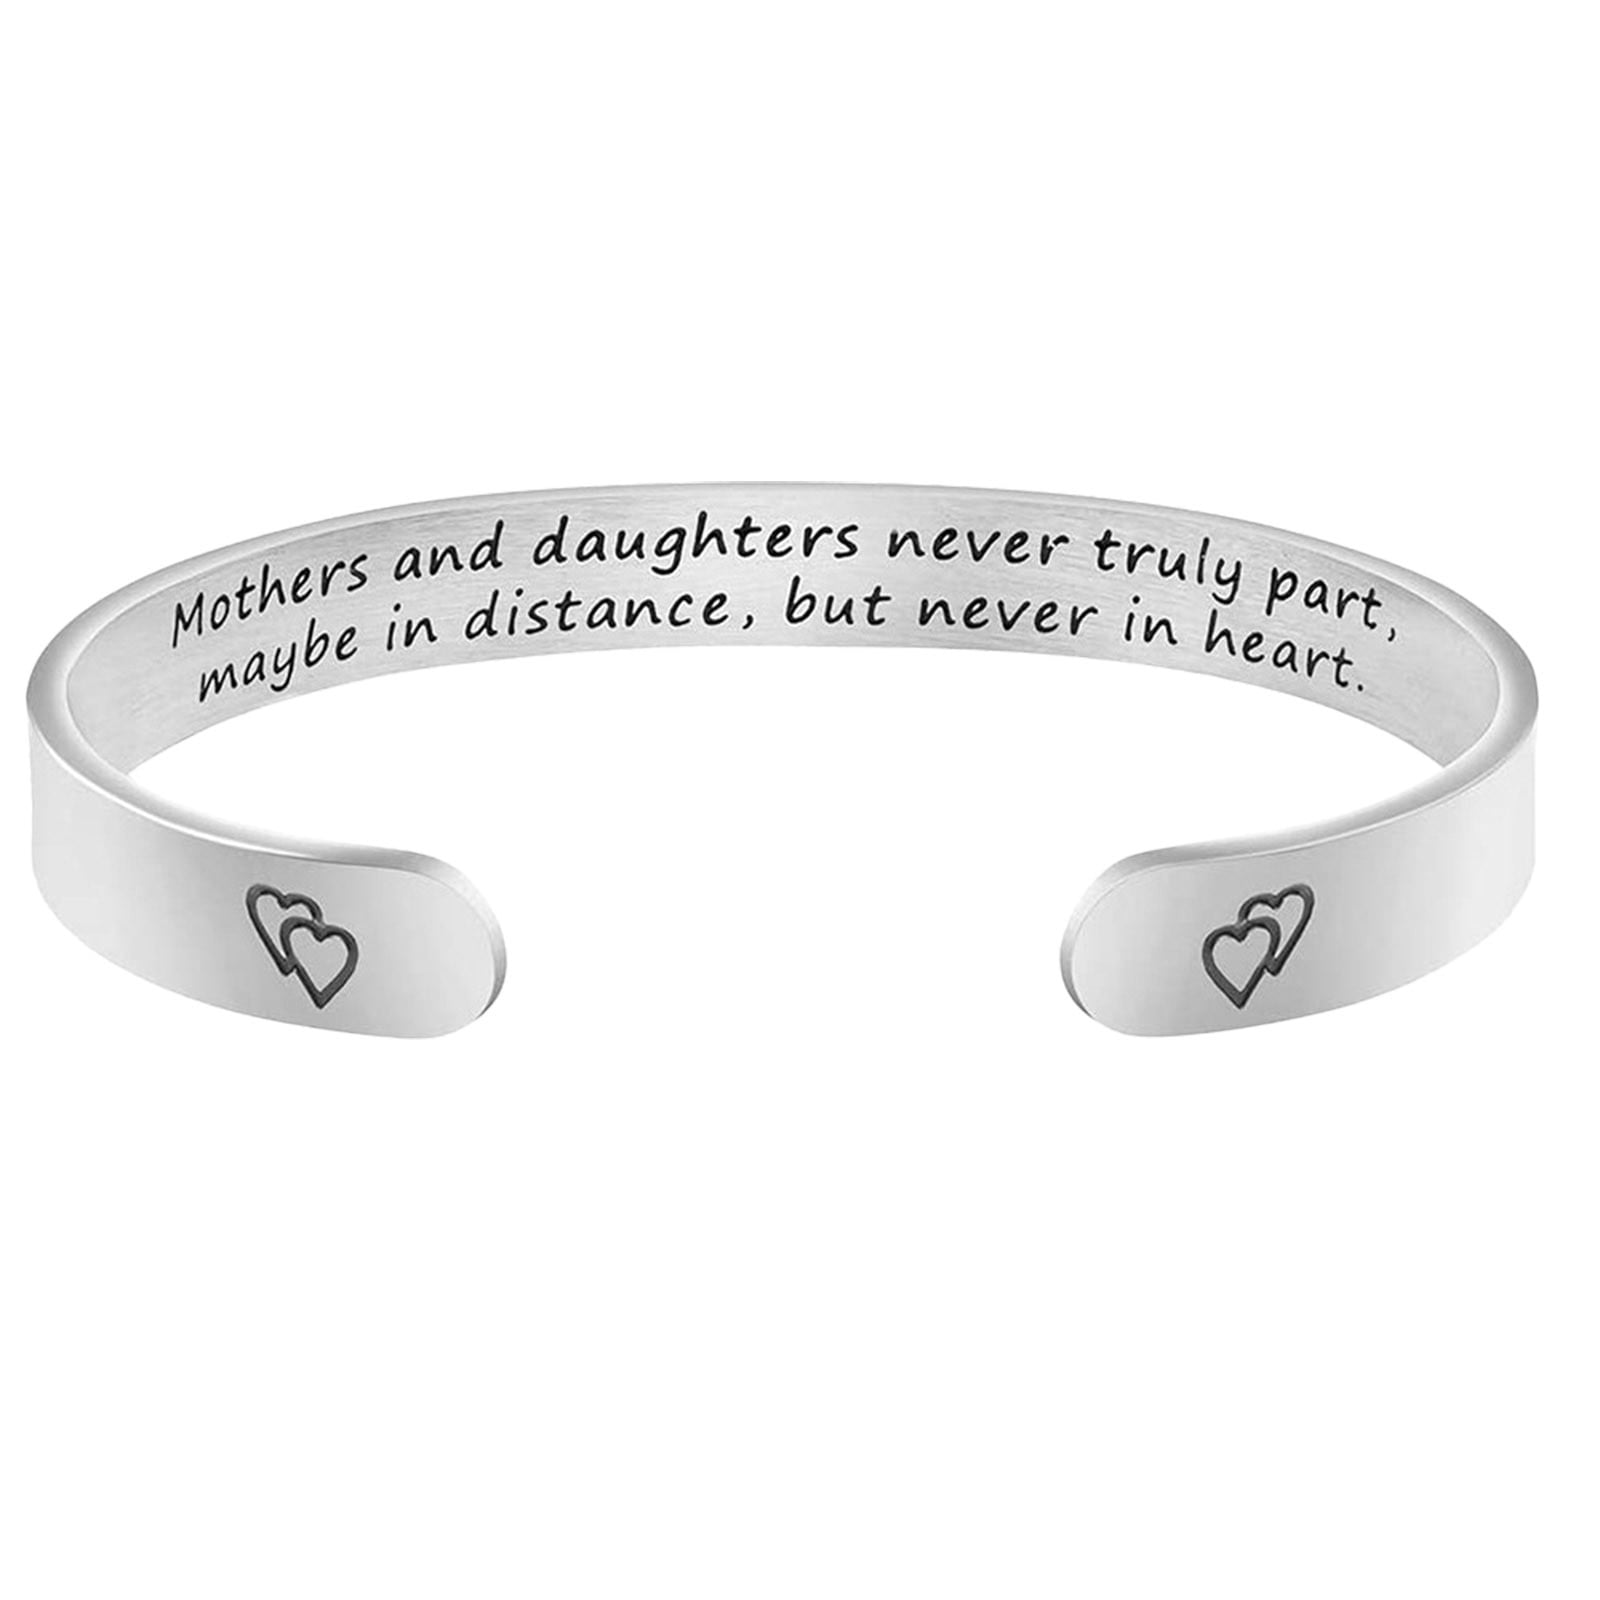 Engraved Gift For Stepmom Black Stainless Steel Bracelet Maybe In Distance Stepmom And Stepson Never Truly Part But Never In Heart